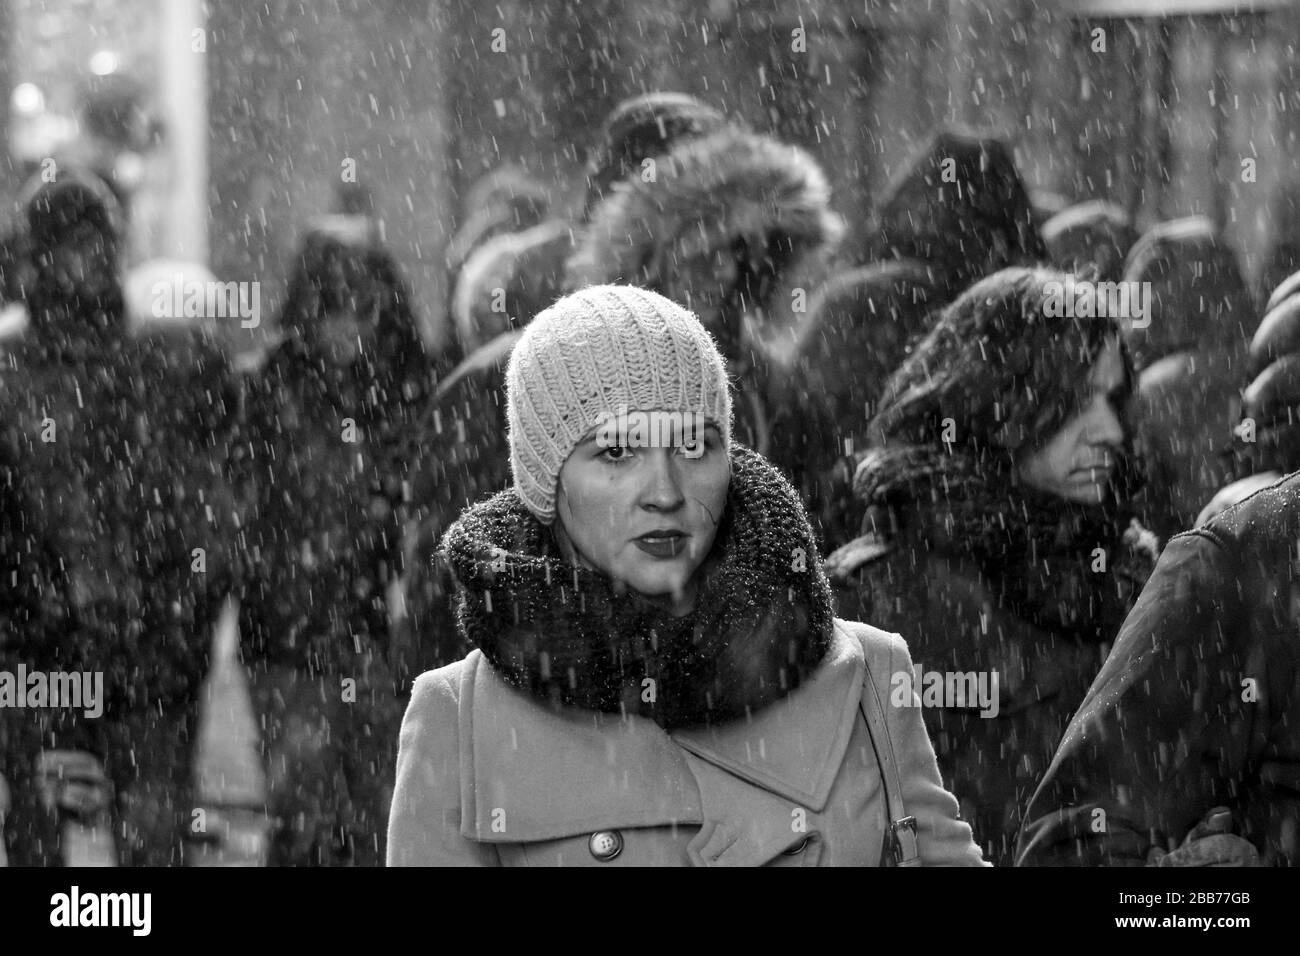 Young woman during a snow fall in Time Square, Manhattan, New York City, United States of America Stock Photo